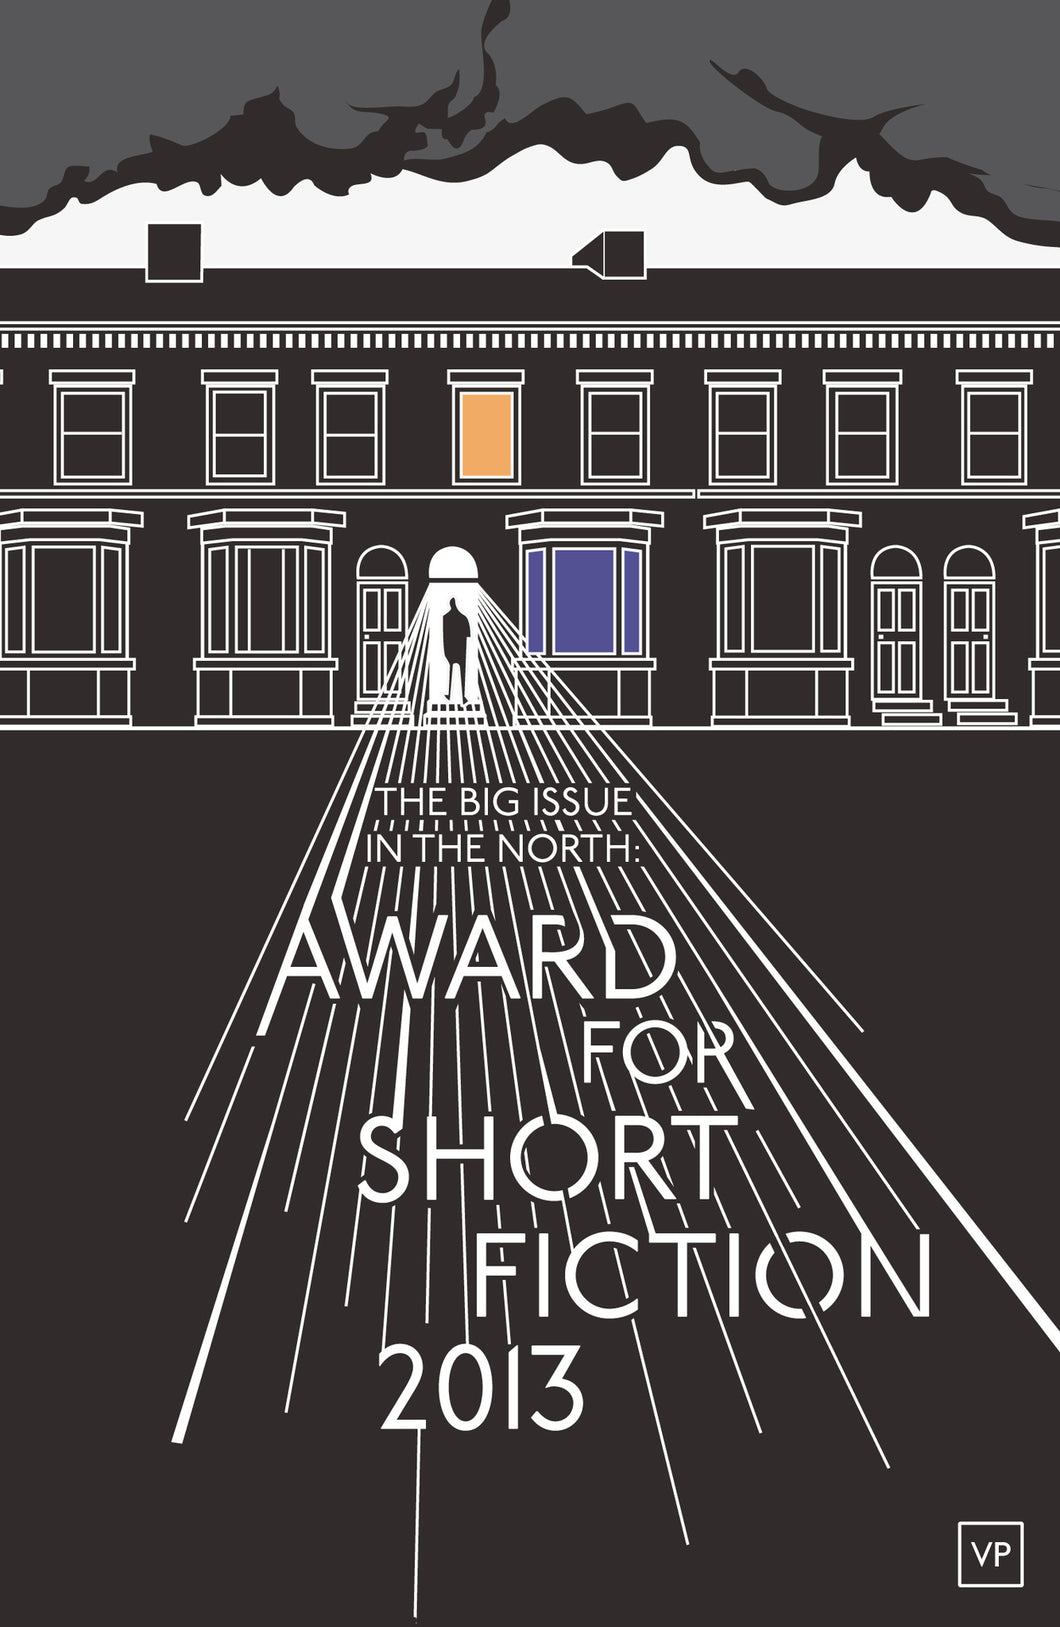 The Big Issue in the North: Award for Short Fiction 2013